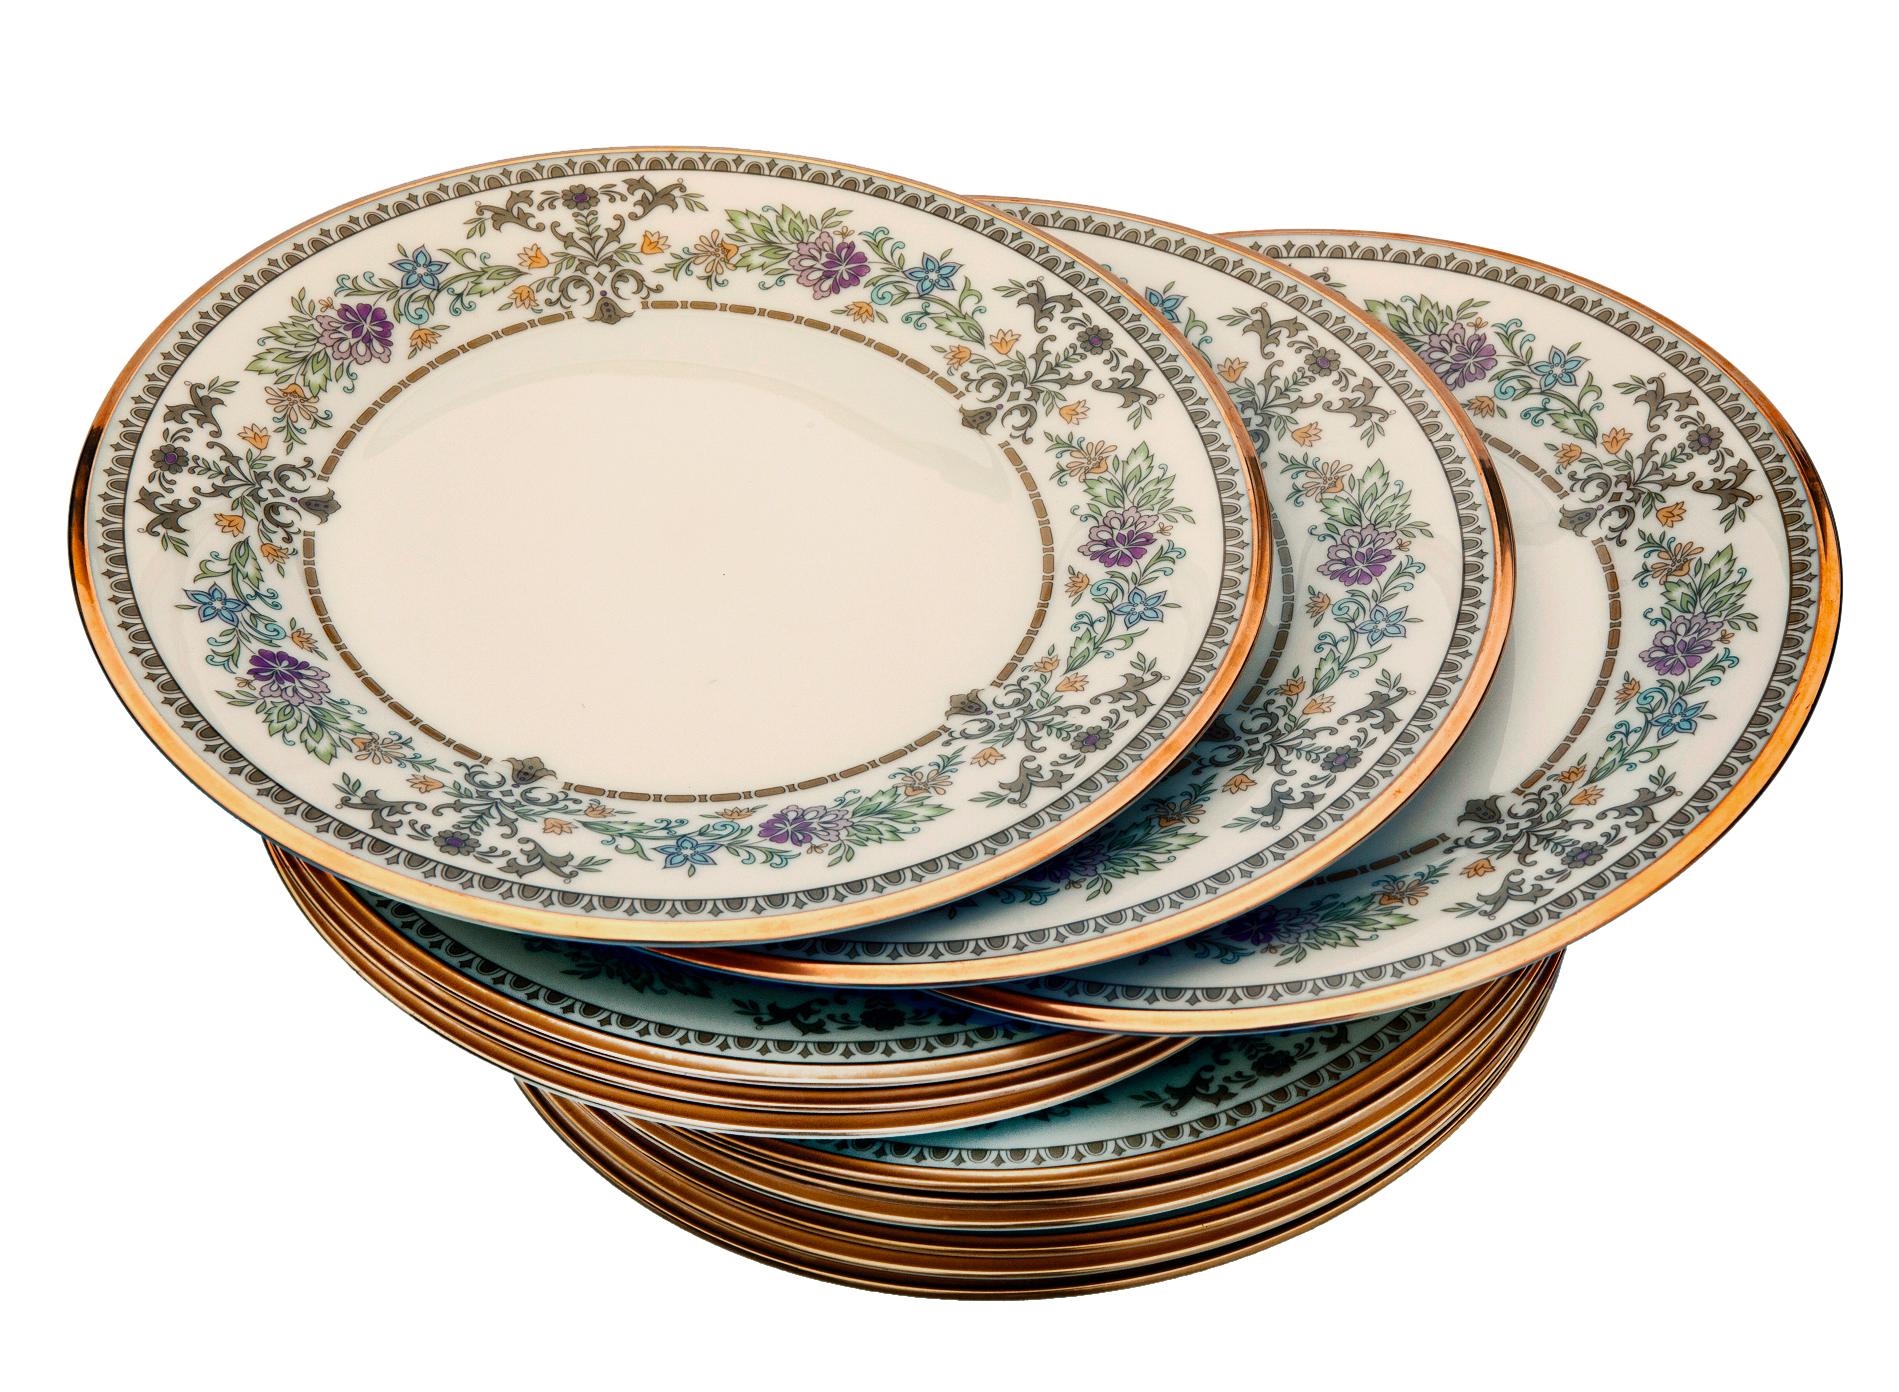 Classic Lenox china pattern “castle garden” from the 1970's in shades of pink, yellow, green on ivory background. 
This stunning pattern has since been discontinued by Lenox.
Gold band border on the rim. Just stunning. In perfect condition. 